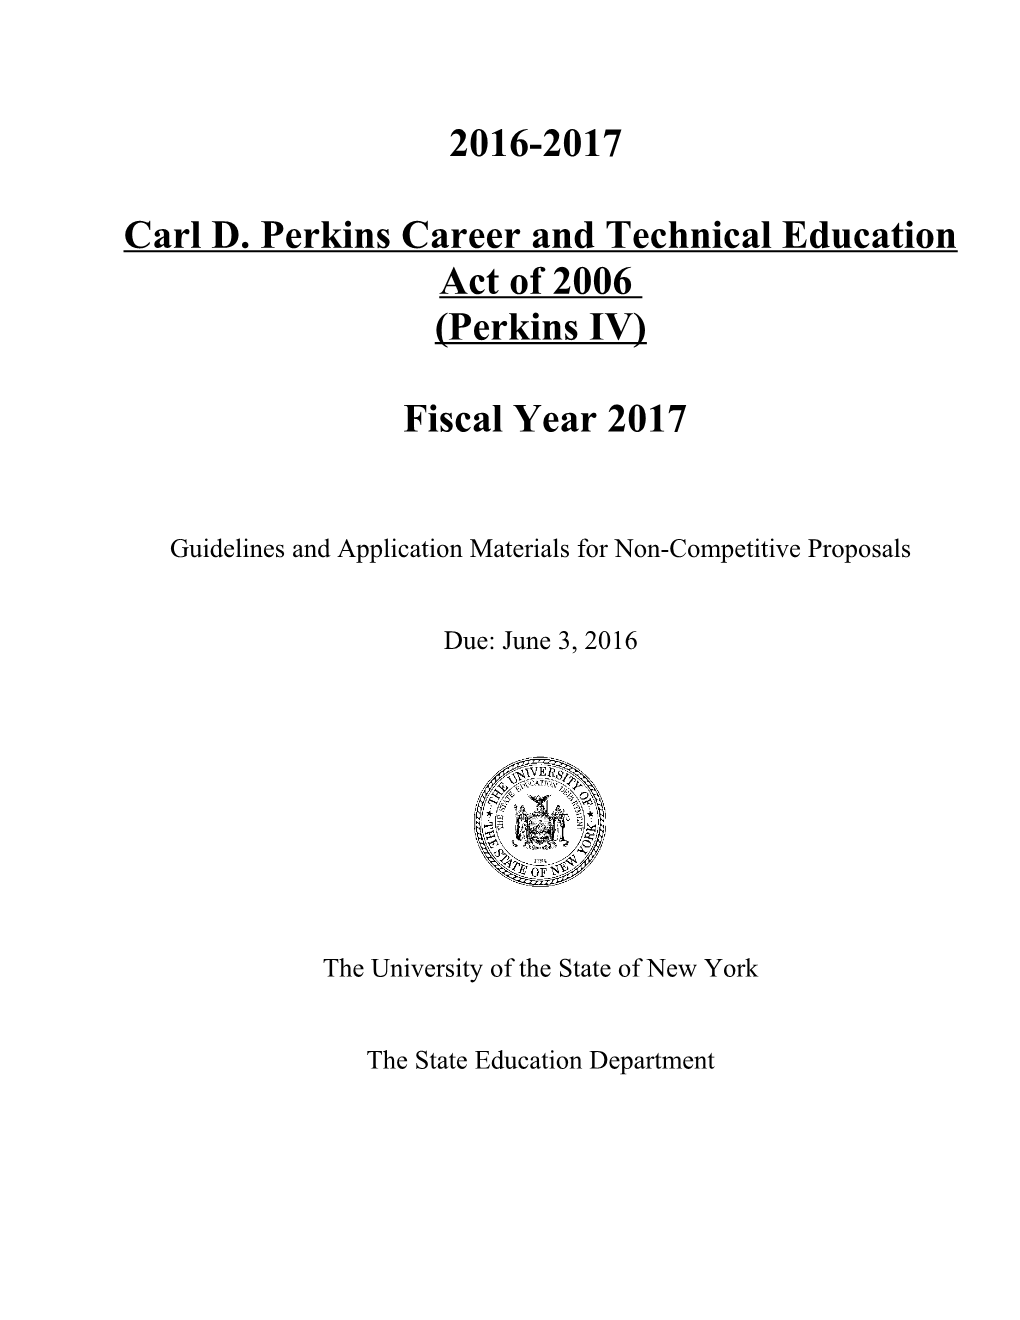 Carl D. Perkins Career and Technical Education Act of 2006 s1